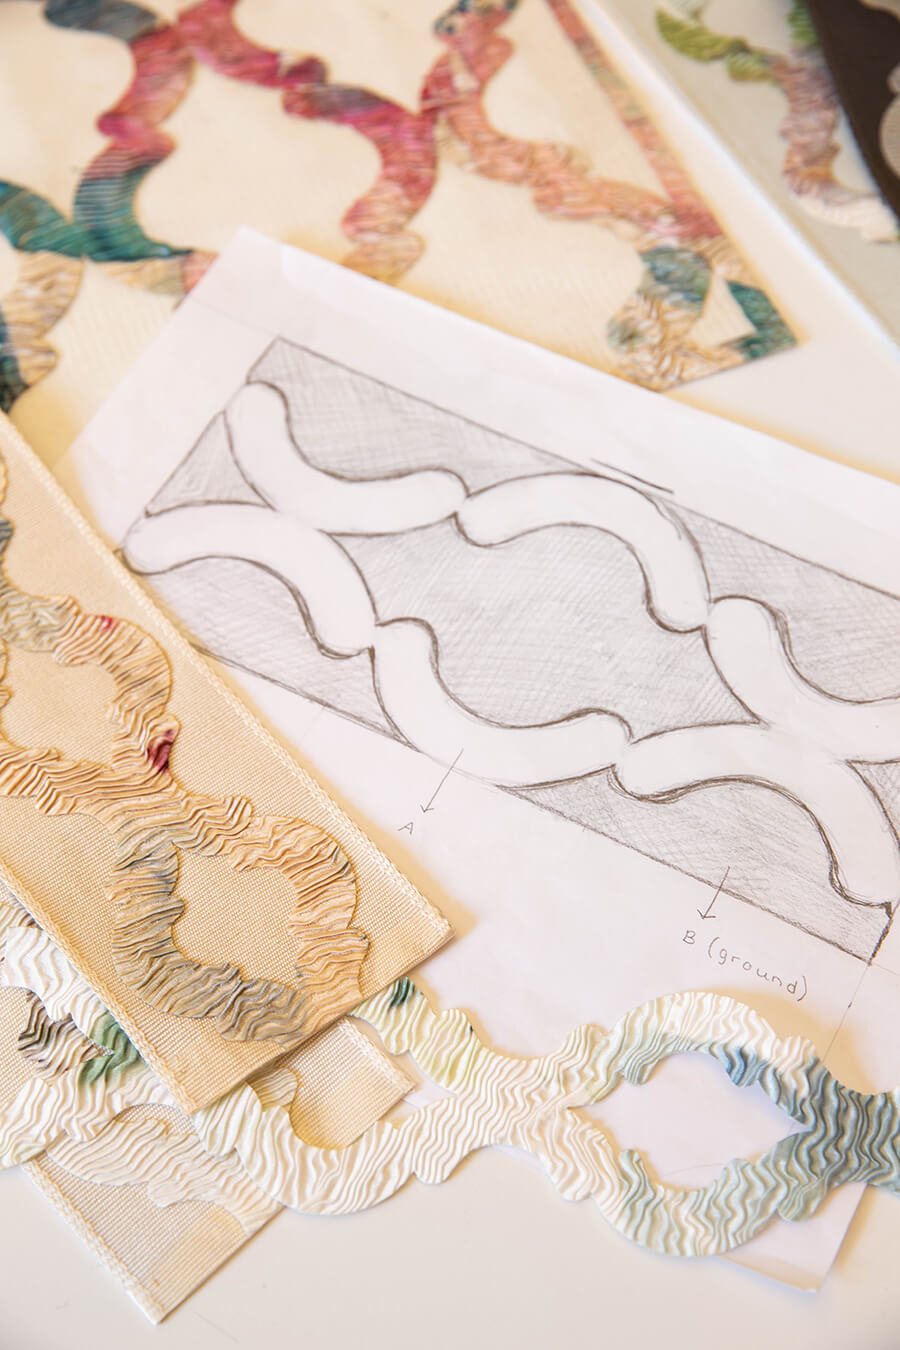 Behind-the-scenes during the development of the Virtuoso Applique Border by Lori Weitzner for Samuel & Sons.